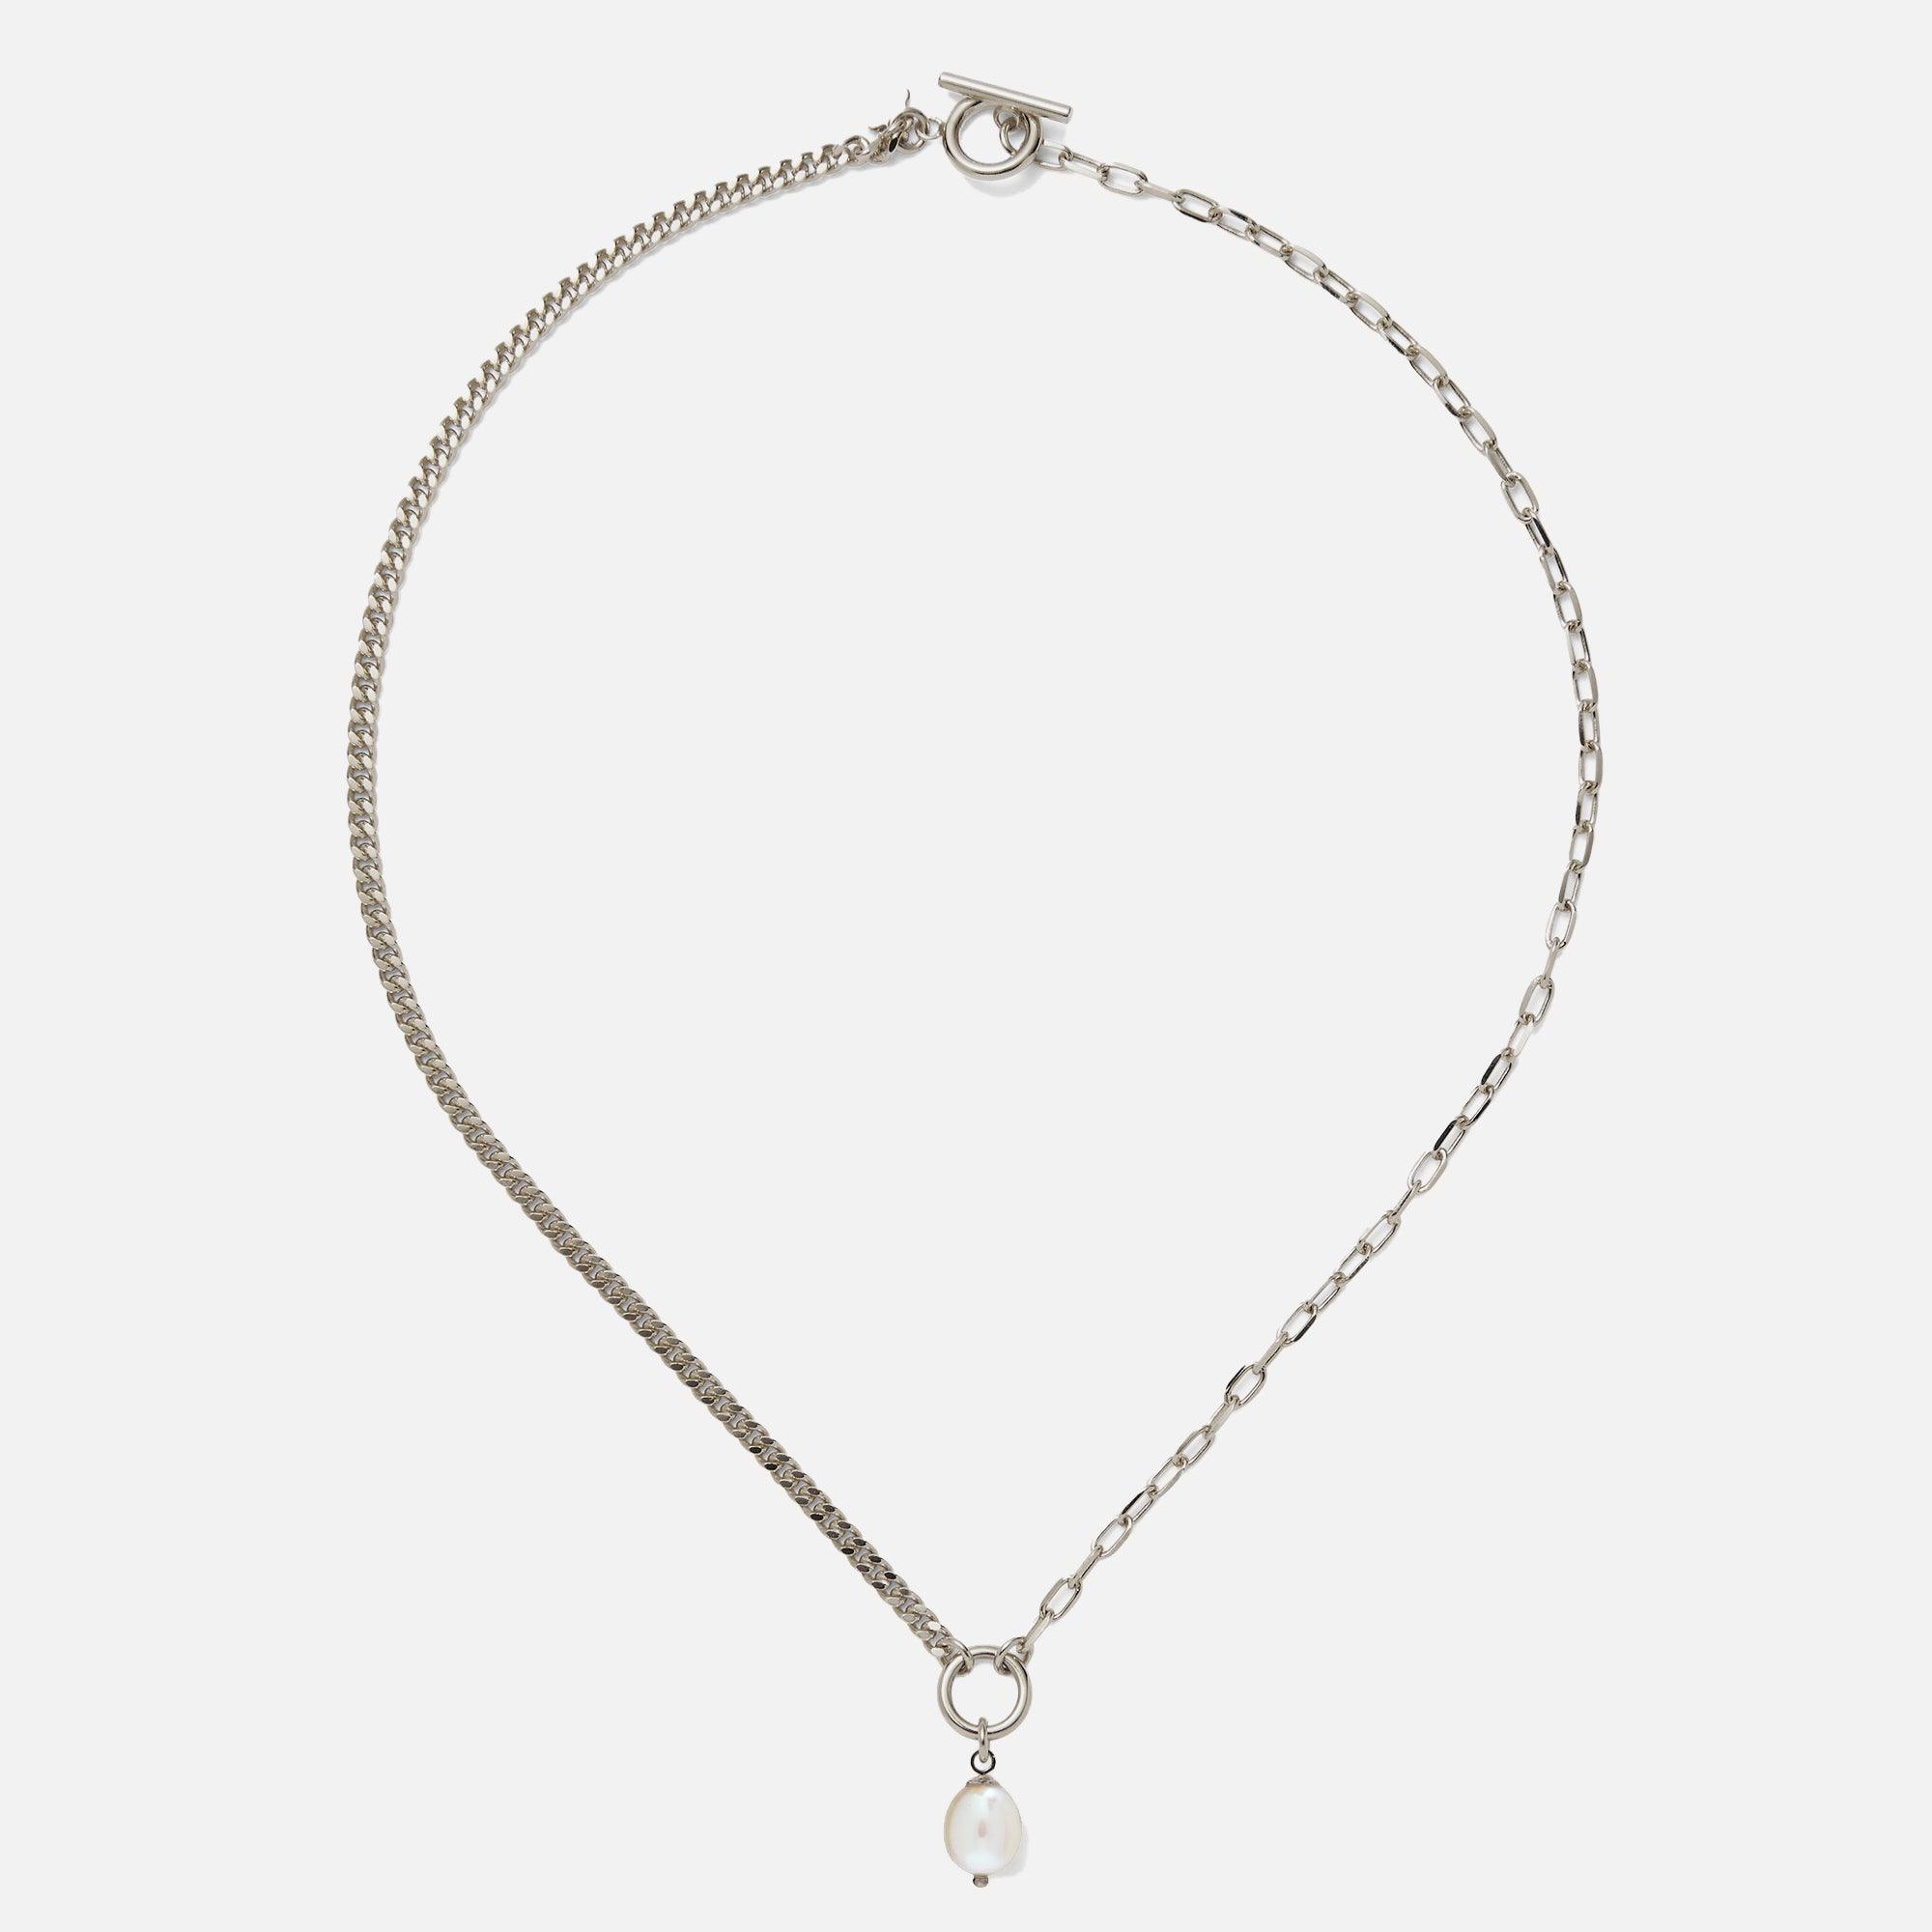 Duo Chain Necklace with White Pearl in Silver - At Present